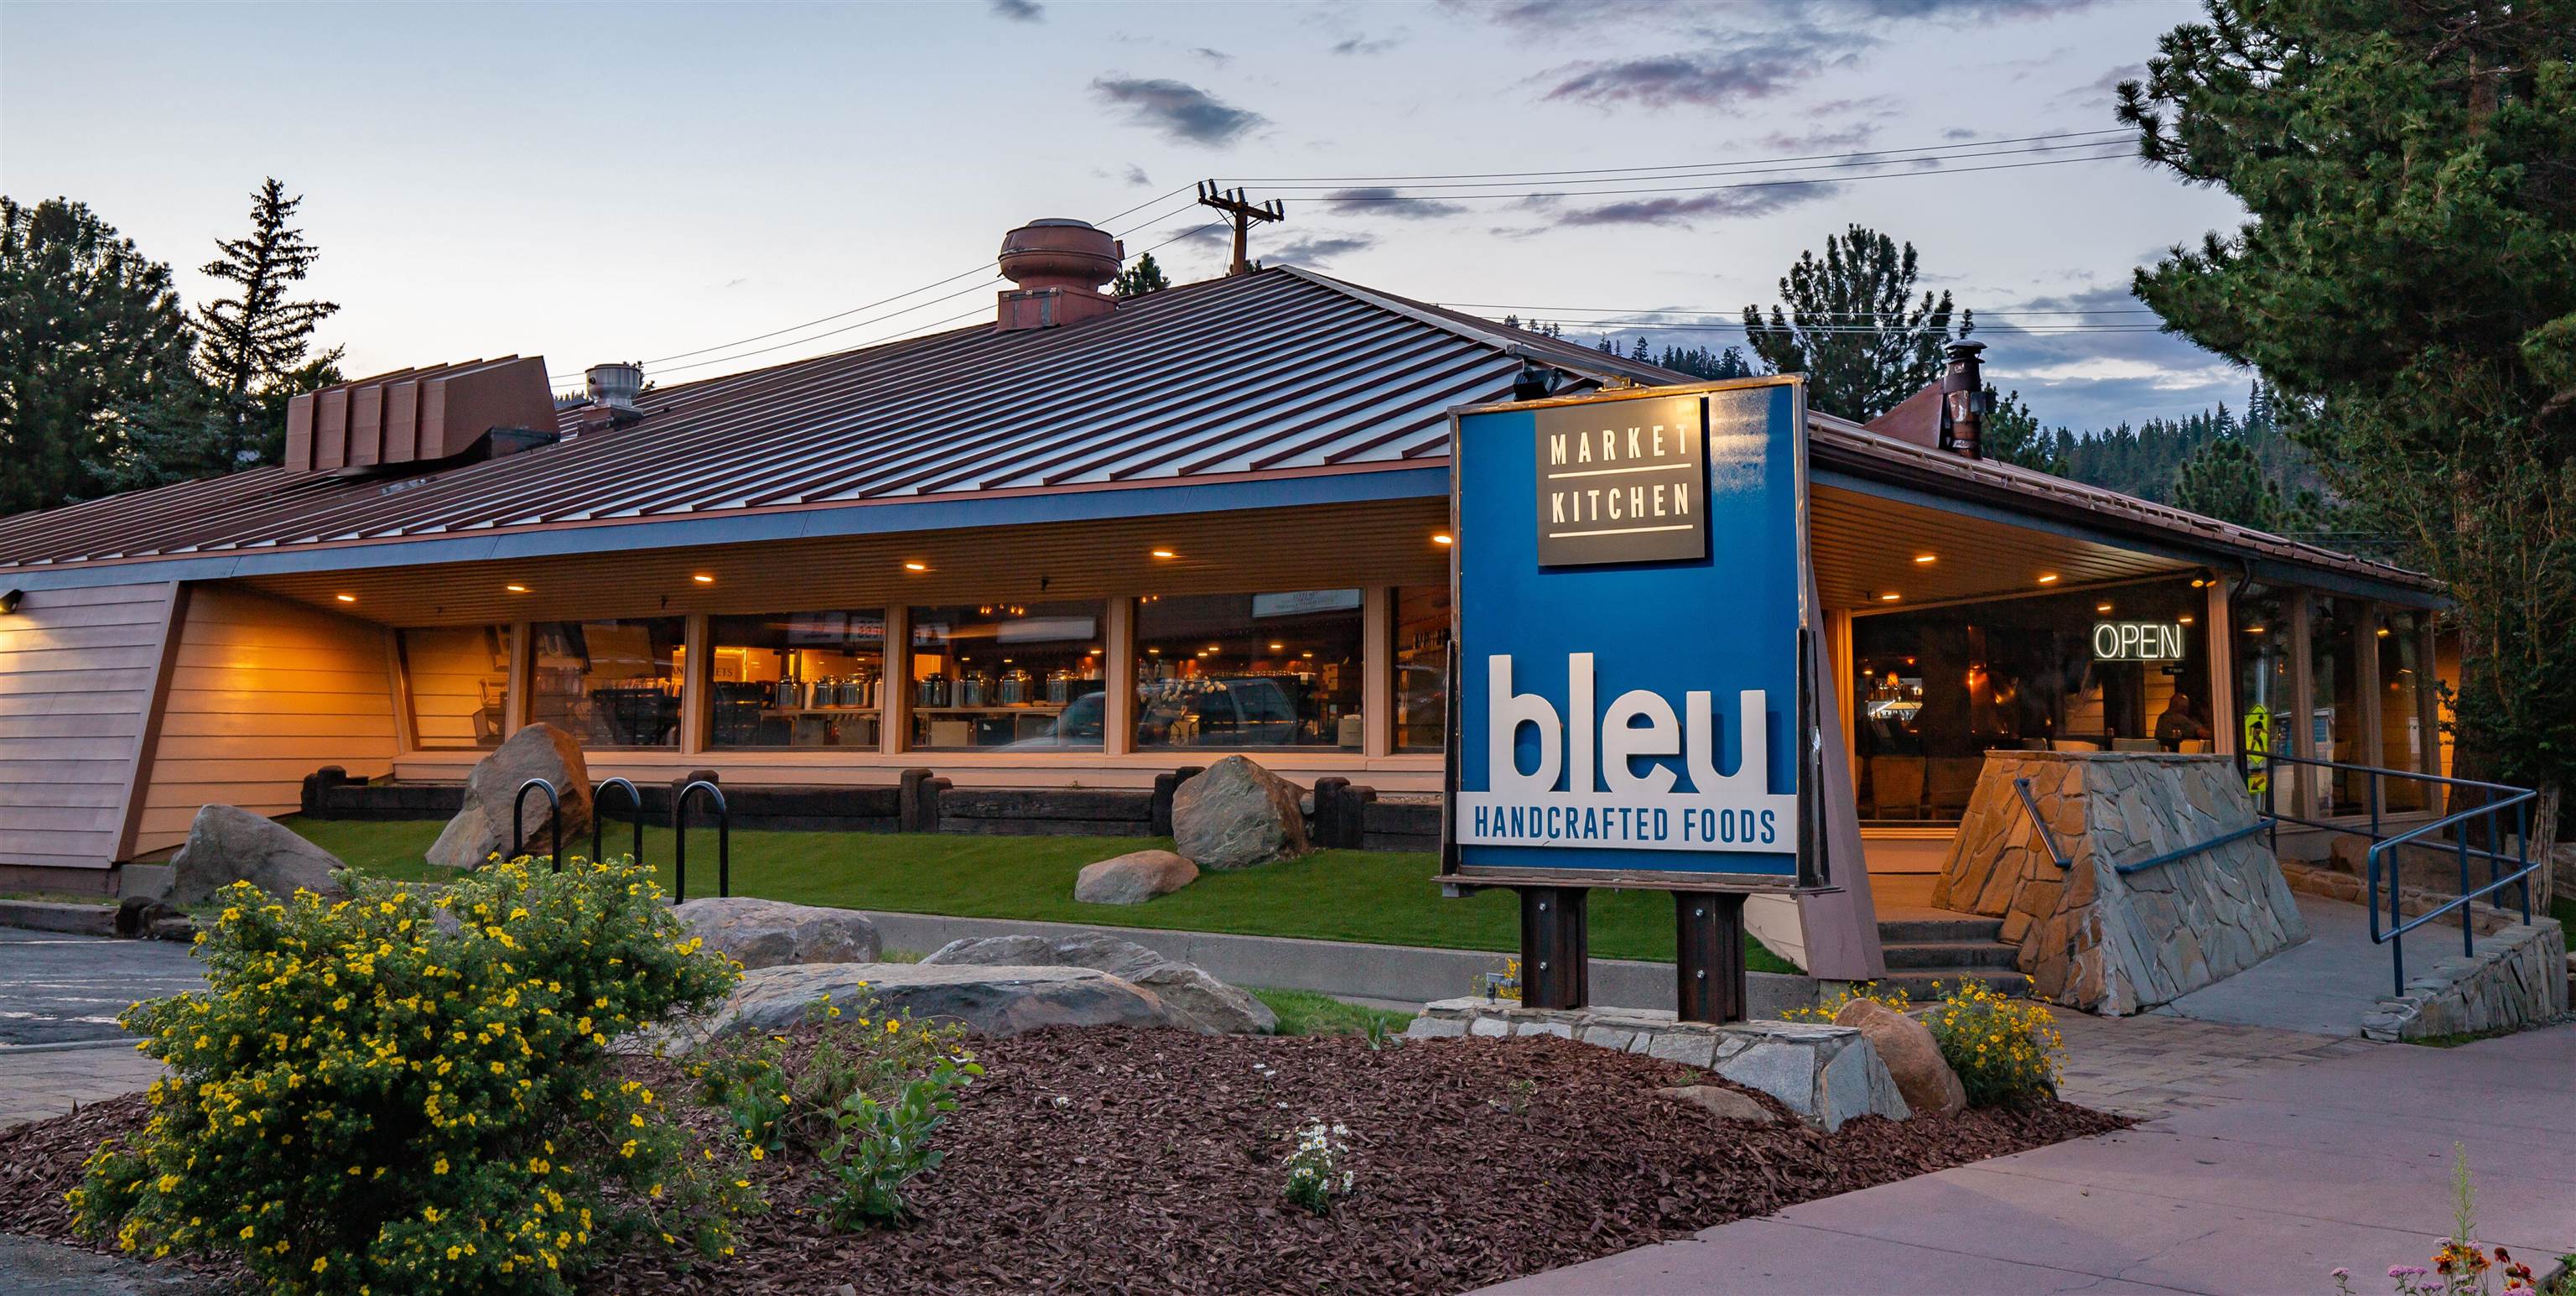 Prominent corner location on one of Mammoth's busiest streets. Originally built as a Charterhouse, this location has proven itself as two of Mammoth's most successful restaurants over a 38-year history, Charthouse and Blue Market/Restaurant. Remodeled in 2018 with more than $400,000 in improvements and finished as Bleu Restaurant/Barand Specialty Market. This space boasts high ceilings with massive glulam beams and modern mountain finishes. This space is turn-key and ready for Mammoth's next big restaurant(s) or market concept. Property also available For Lease.  Sale or lease to include significant inventory as well as use of an off-site beer and wine license and on-site liquor license. Tesla charging station across the street generates consistent and reliable guest visitations. The new "Parcel" housing development is only 1 block to the west and will consist of more than 400 new housing units. Two new hotels currently approved by the Town of Mammoth Lakes demonstrate ongoing growth for Mammoth Lakes. This is the only turn-key restaurant of its type currently available in Mammoth Lakes. See lease listing for details on asking lease terms.  See Associated Docs for Floor Plan and Inventory list.